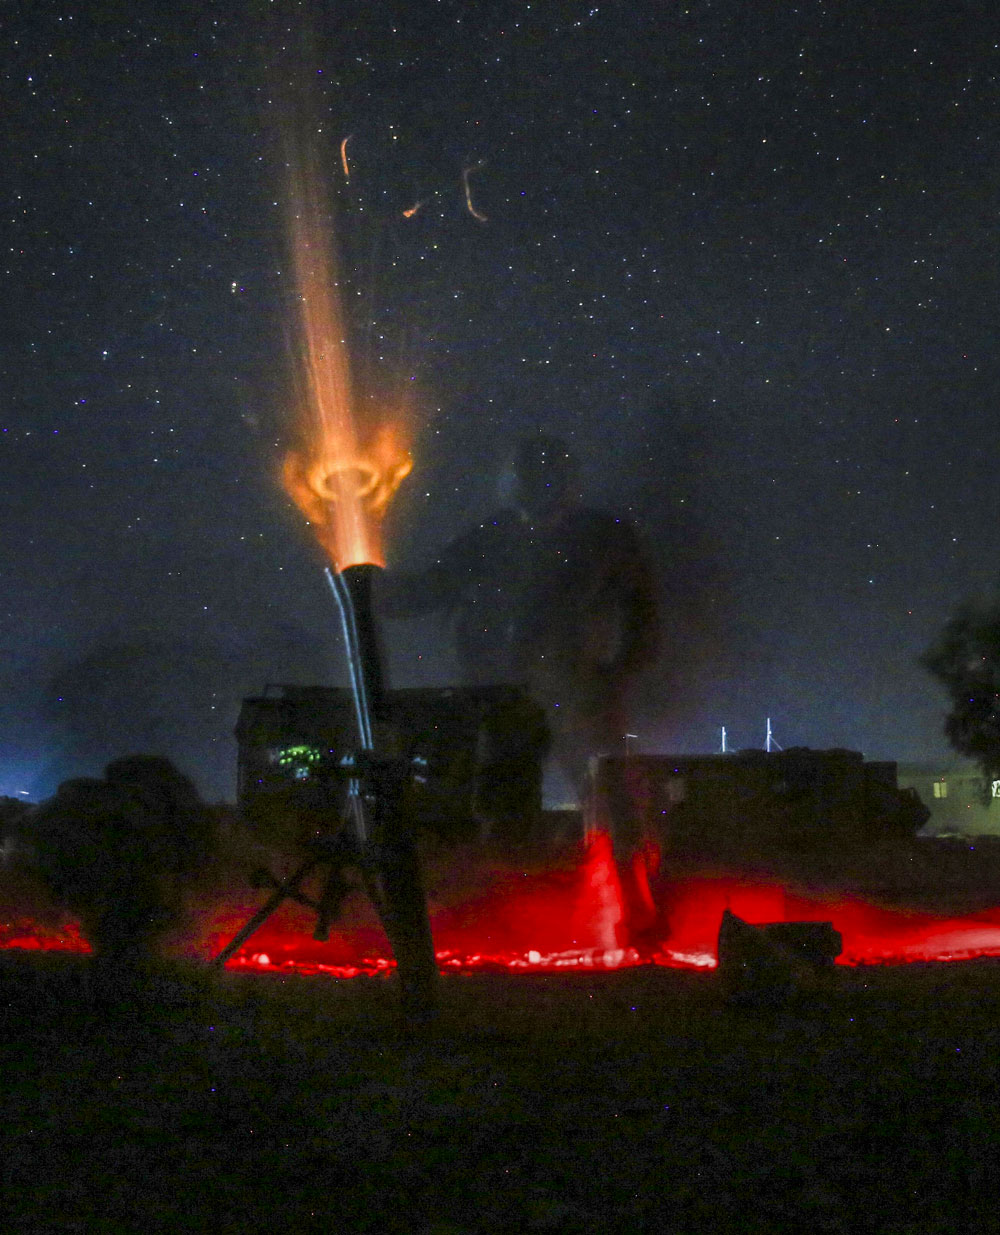 Marines fire a nonexplosive illumination round at night from an 81 mm mortar to deter enemy activity.